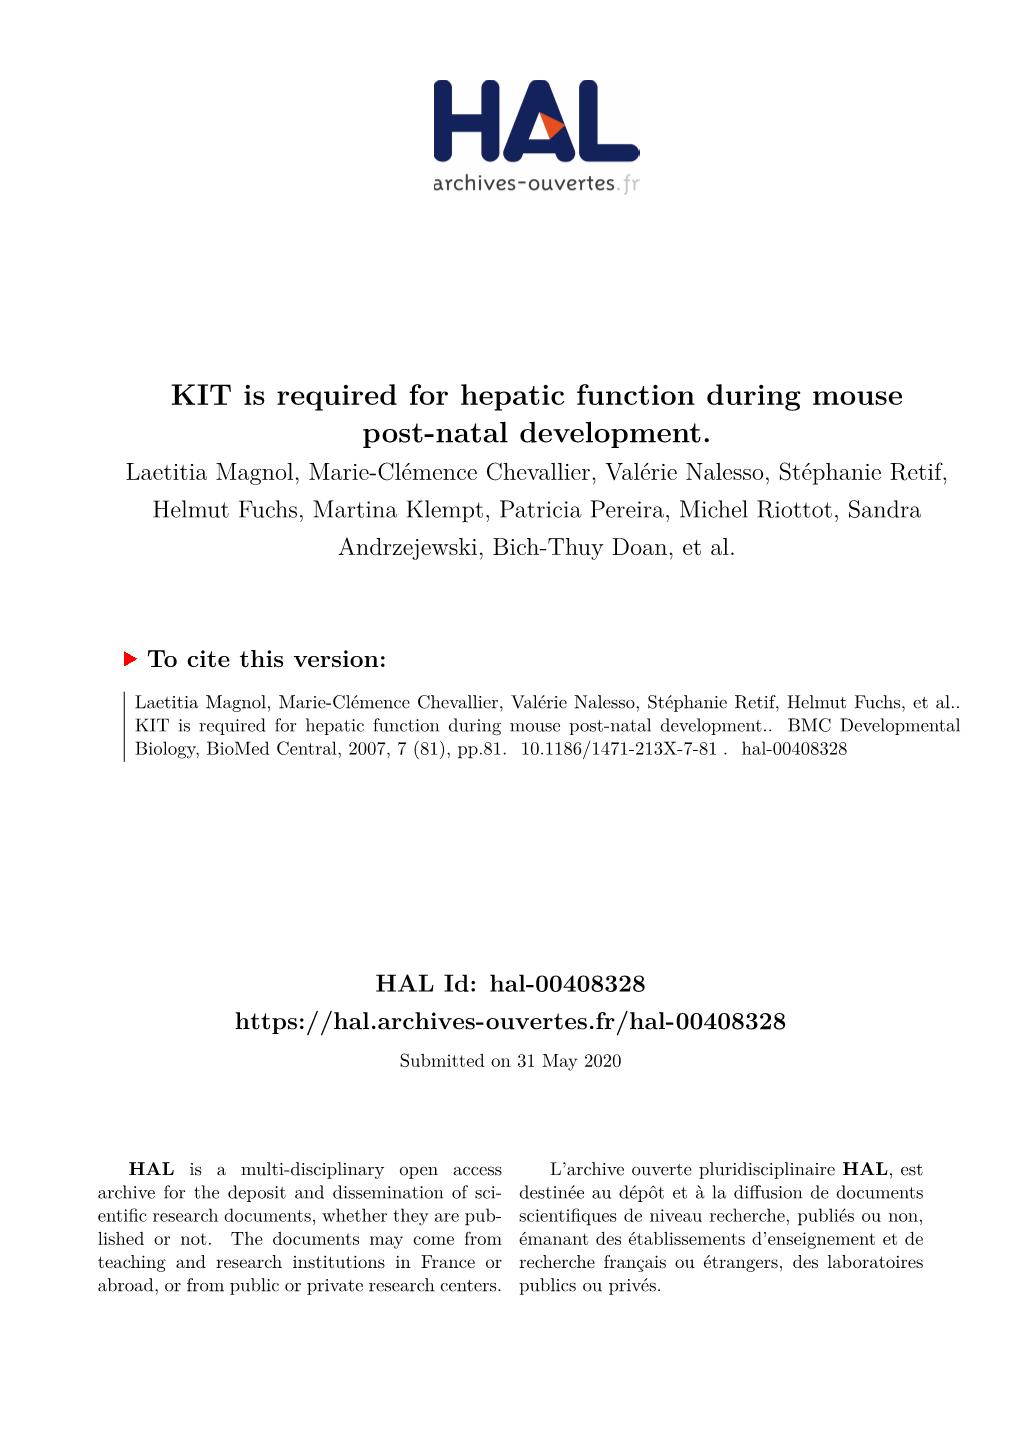 KIT Is Required for Hepatic Function During Mouse Post-Natal Development